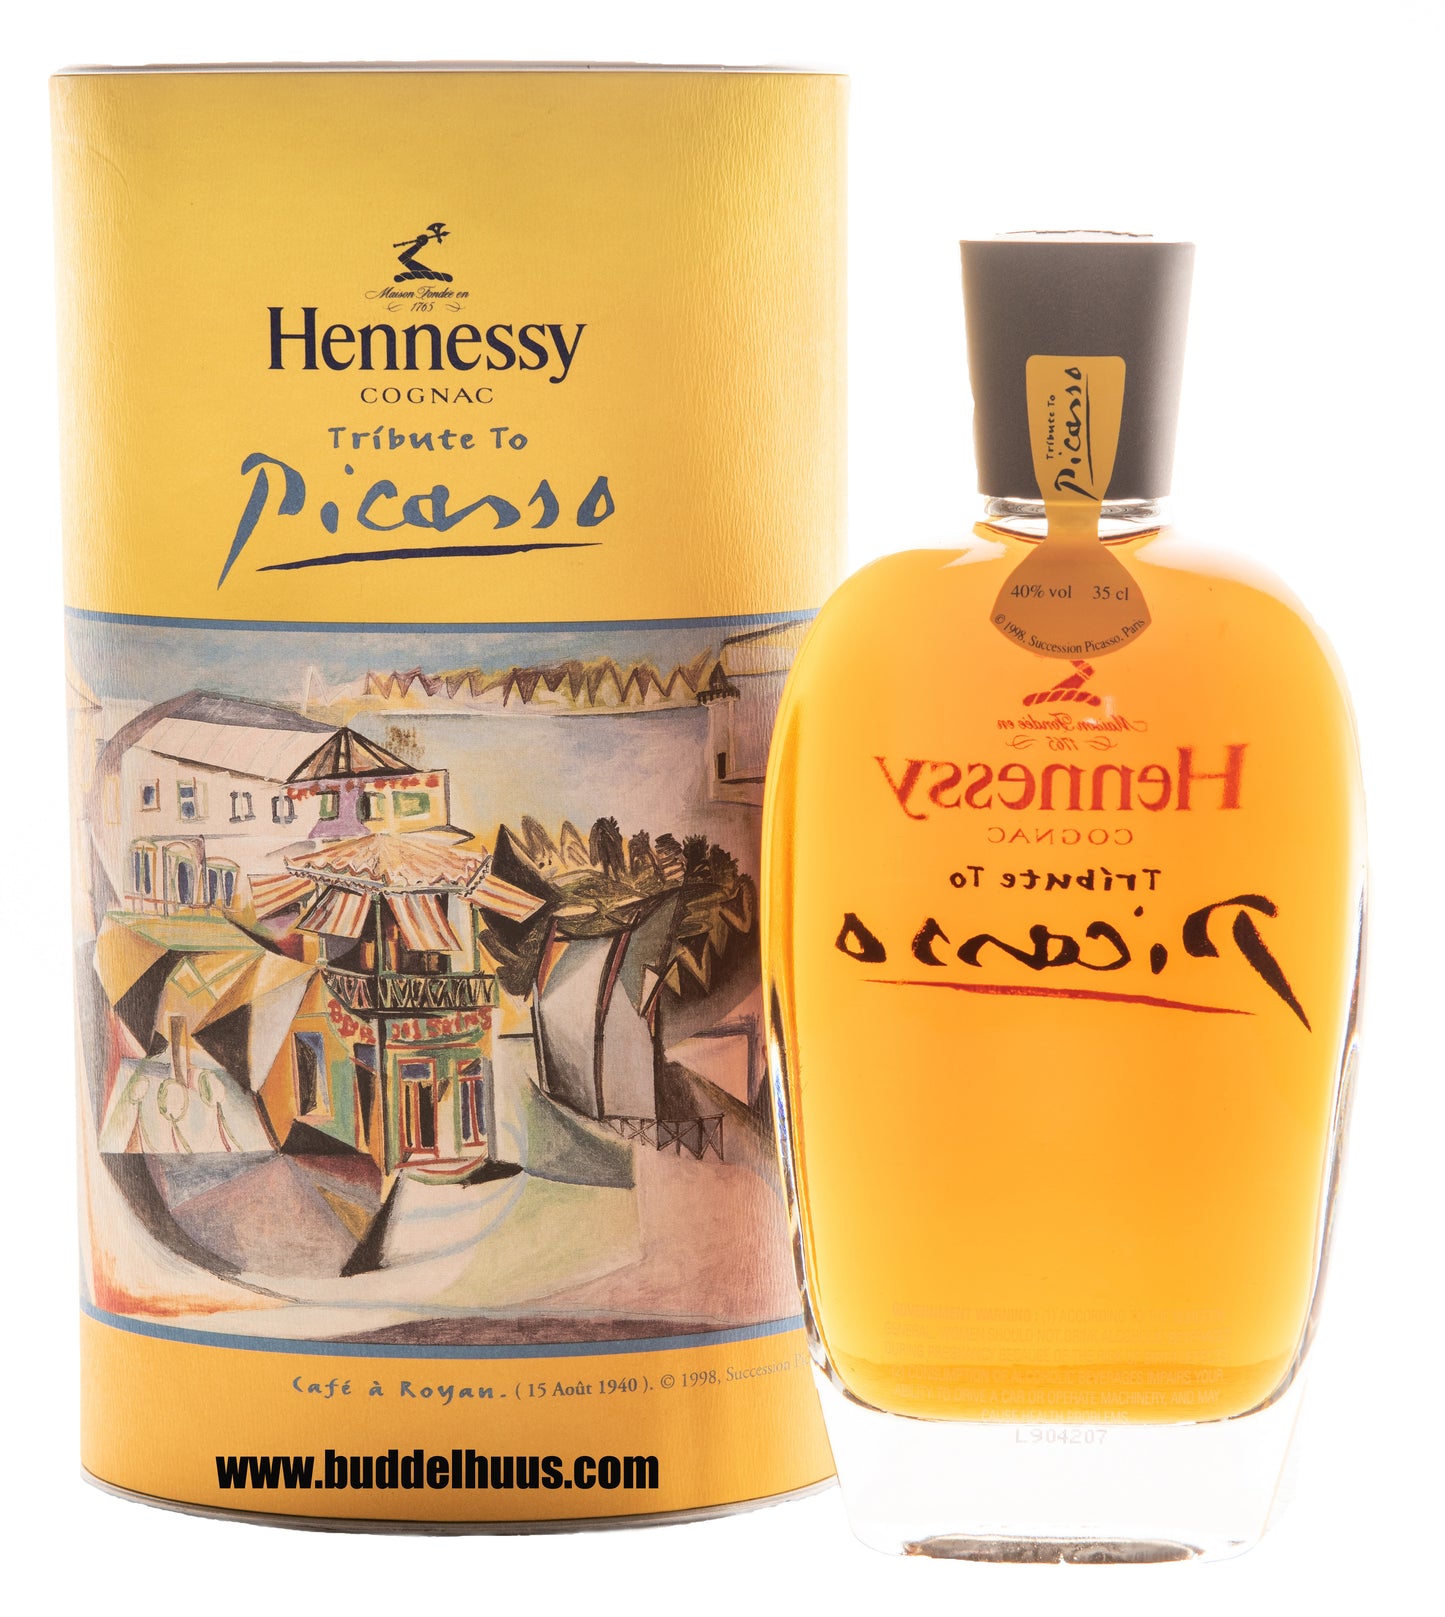 Hennessy Cognac Tribute to Picasso 1998